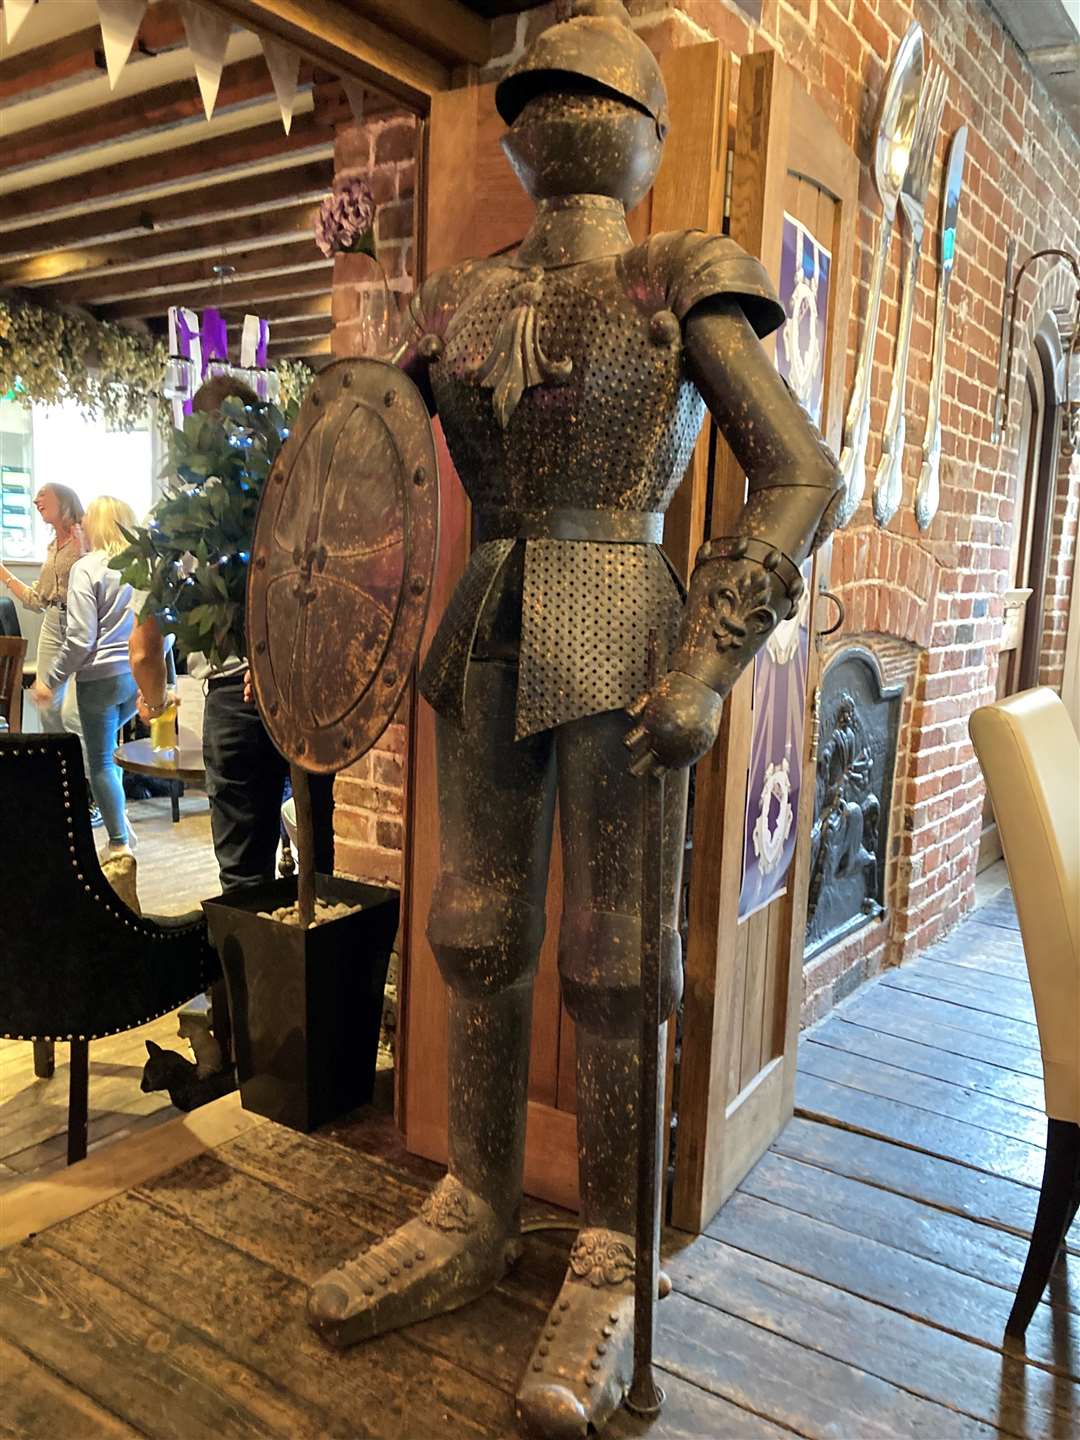 Some of the décor looked a little strange to me but Mrs SD was a big fan – she particularly appreciated the up-scaled cutlery and a suit of armour